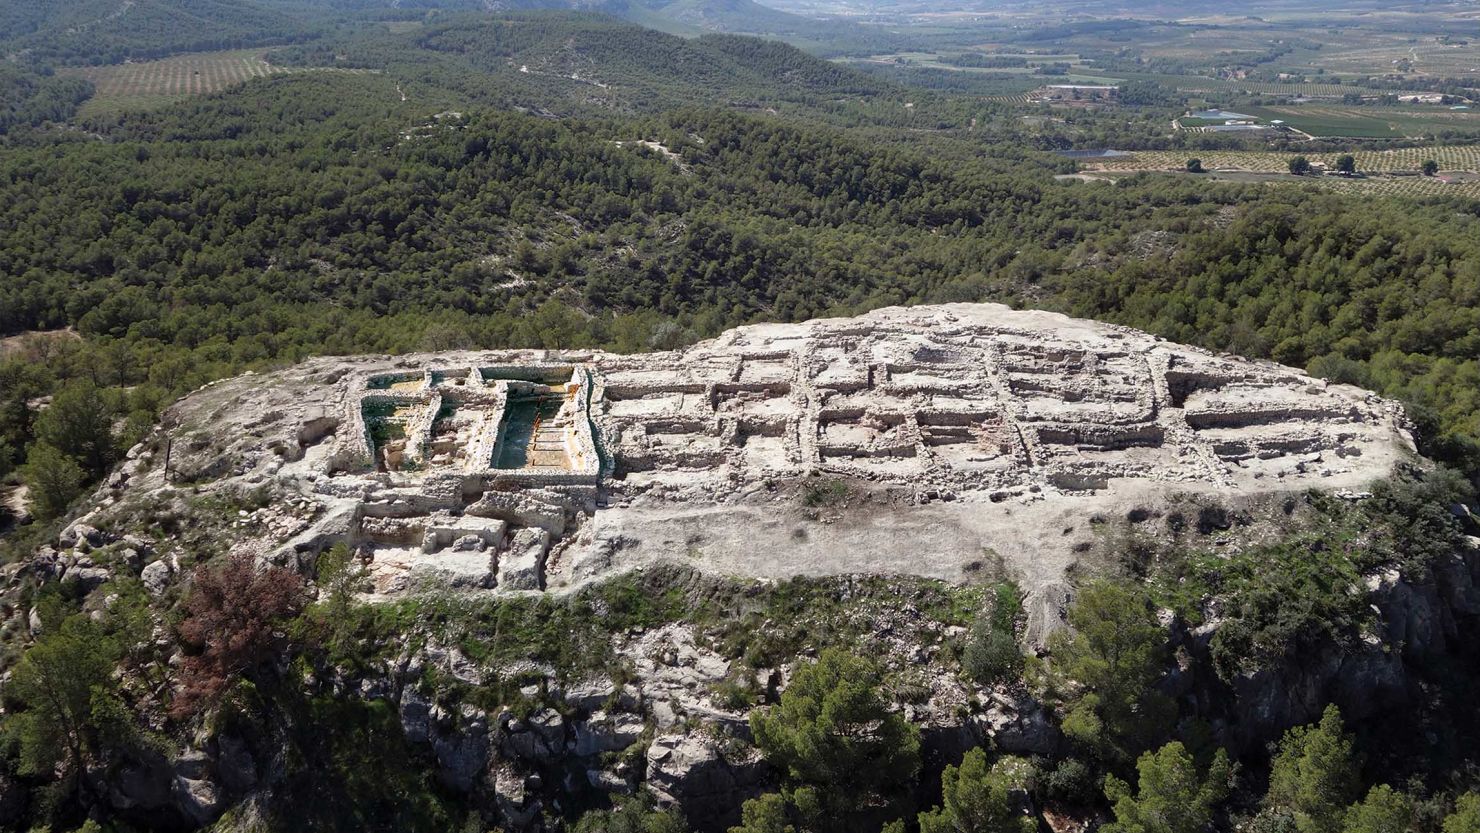 The Almoloya archaeological site is in southeastern Spain.